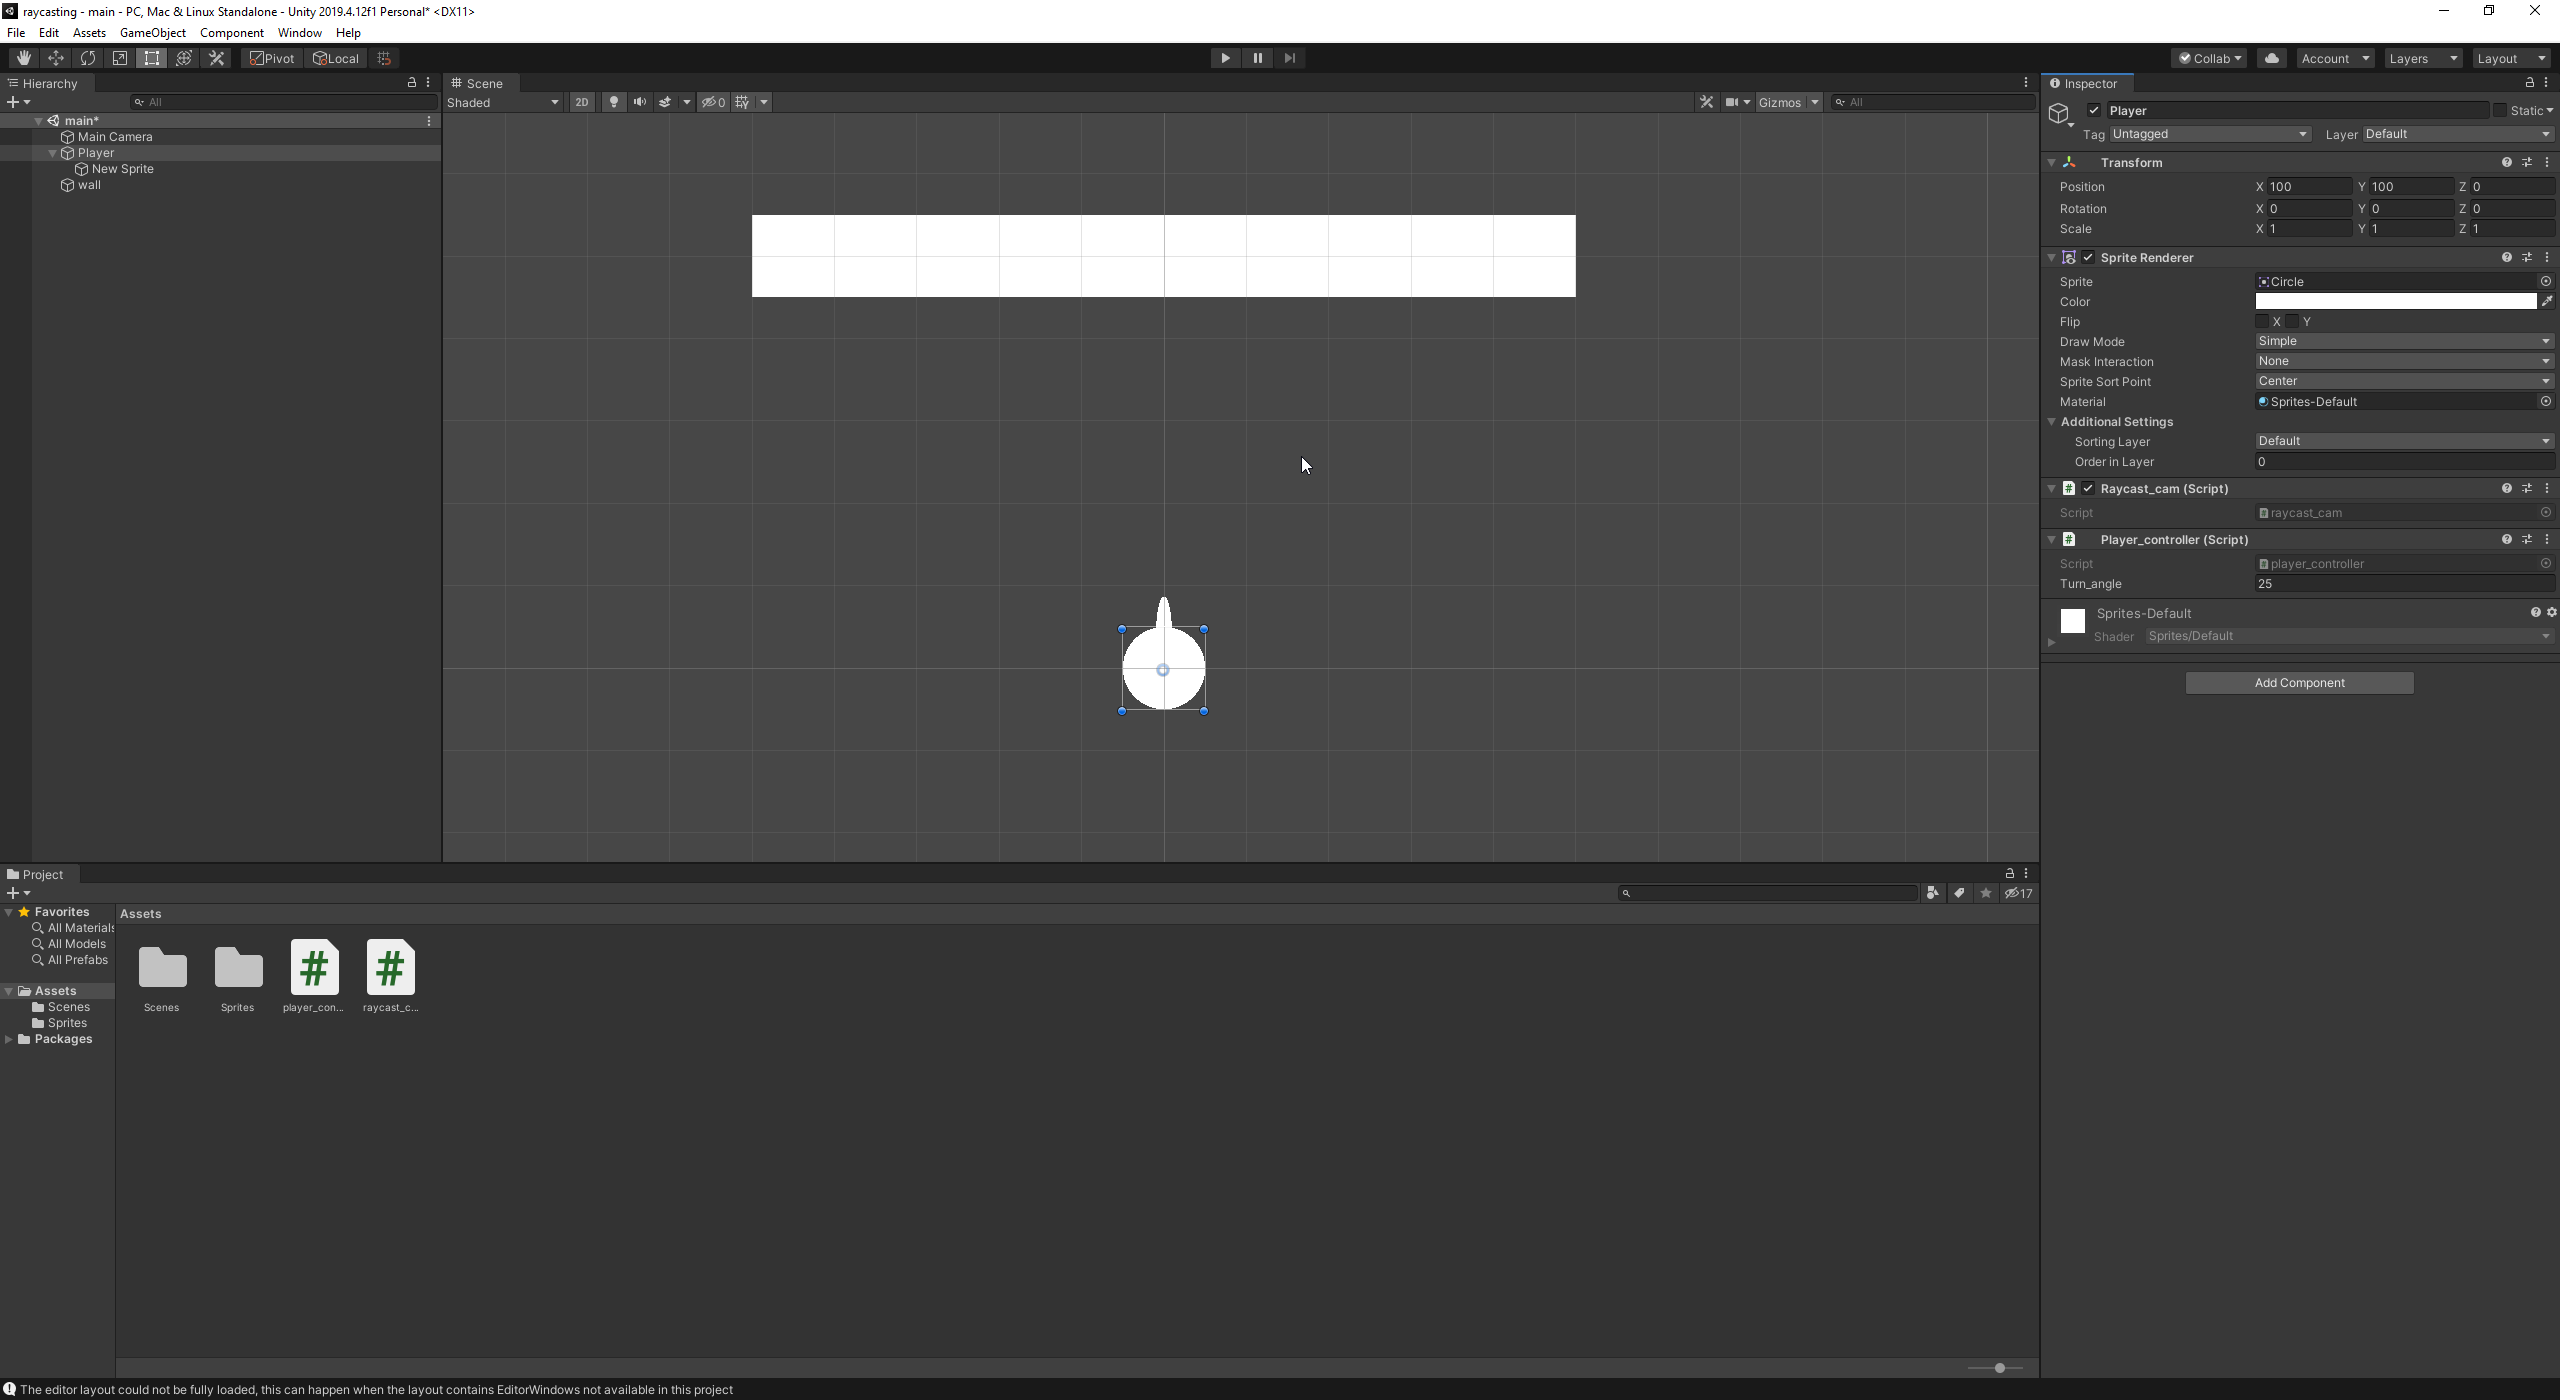 A simple Unity2D workspace with a simple top-down map